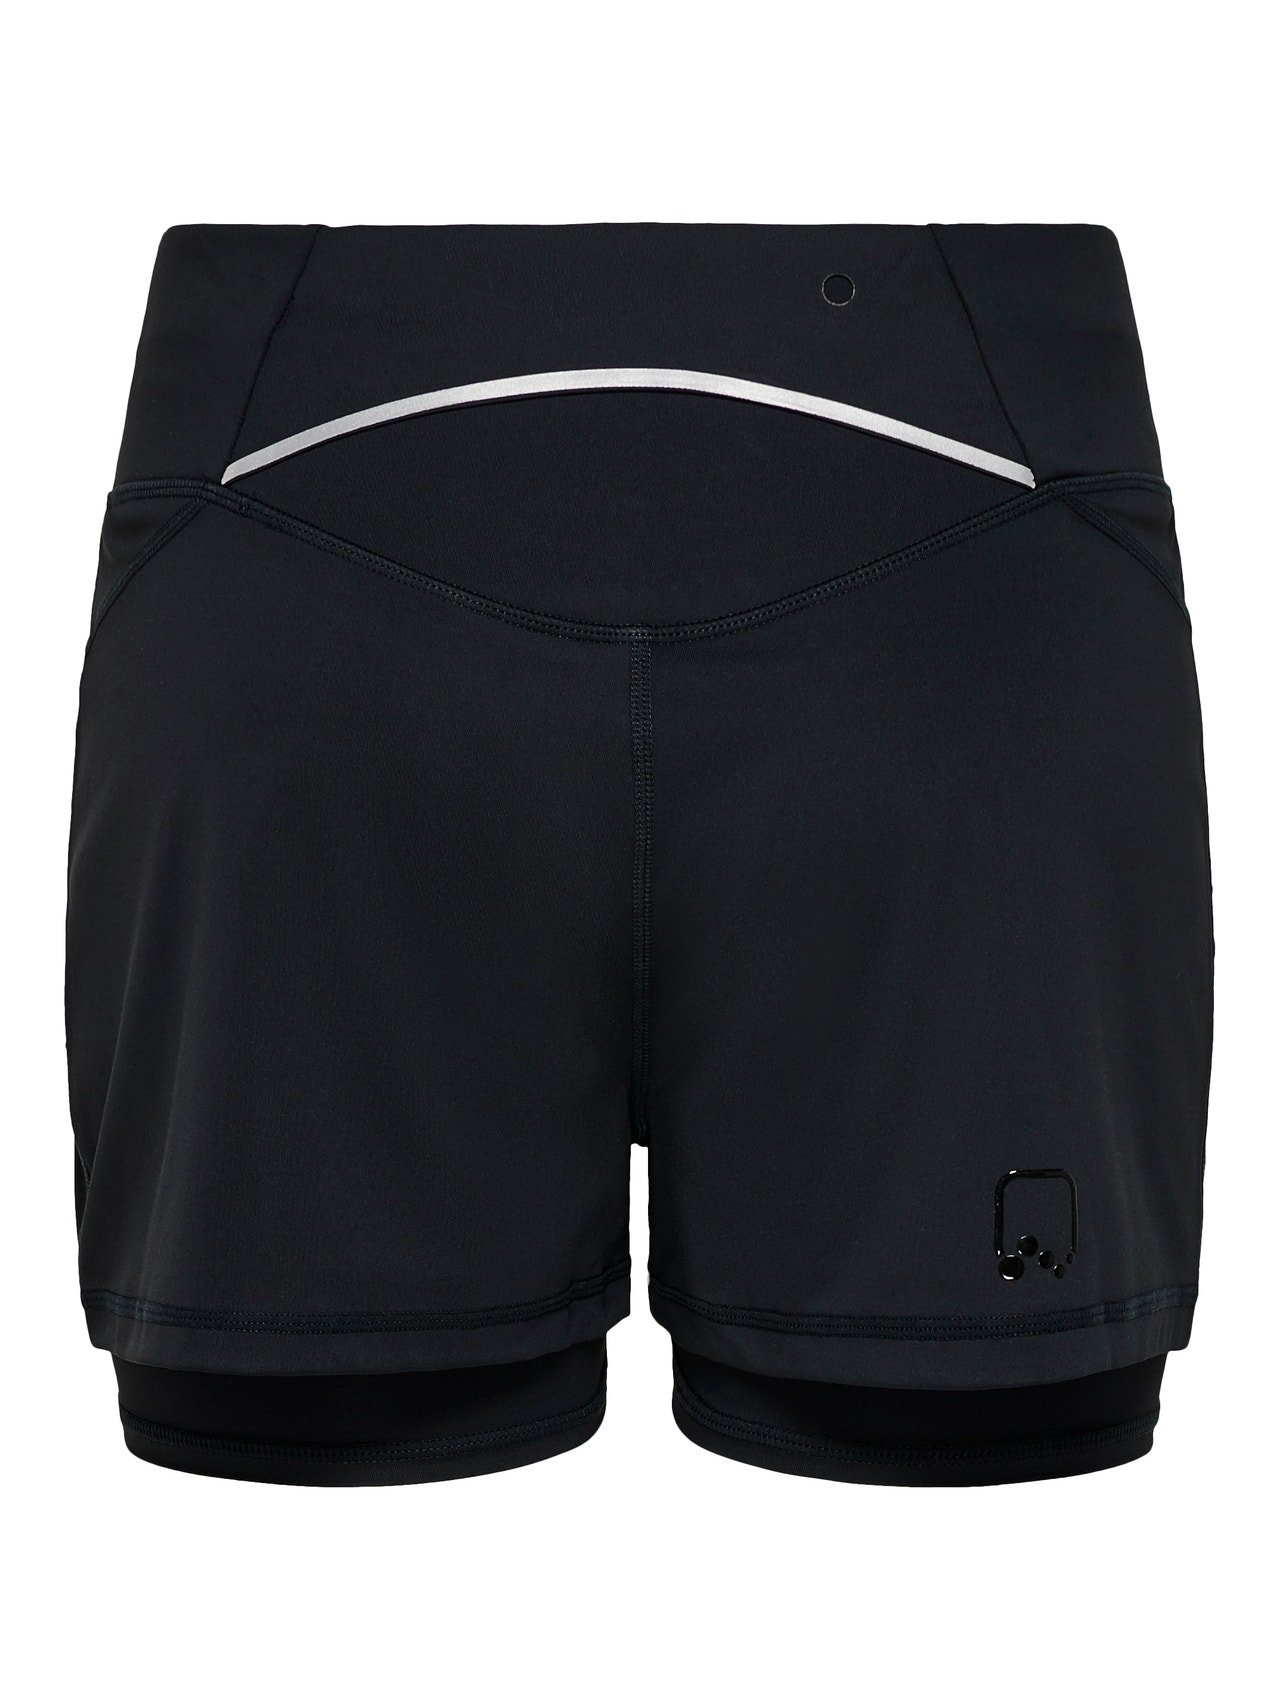 ONLY Course Short -Black - 15189263